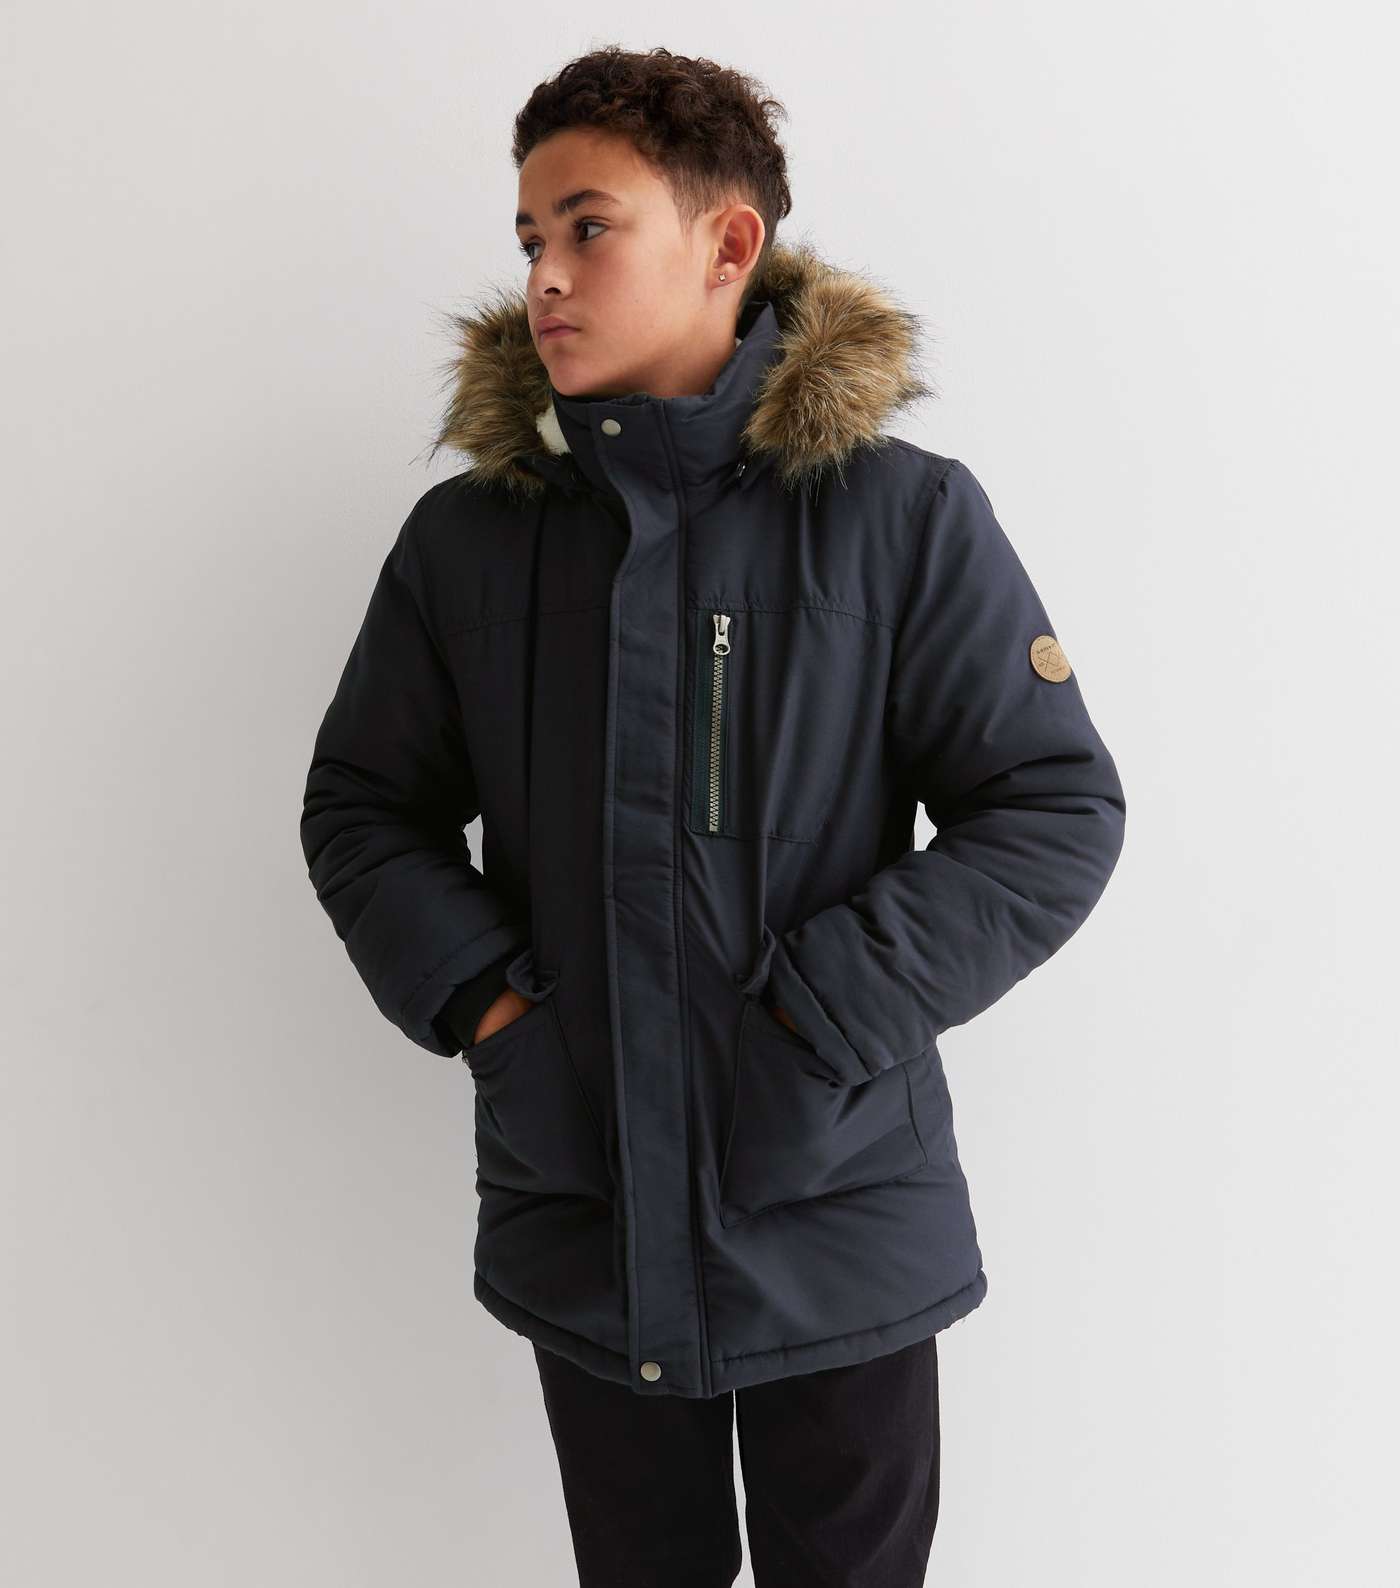 Name It Navy Faux Fur Hooded Parka Jacket